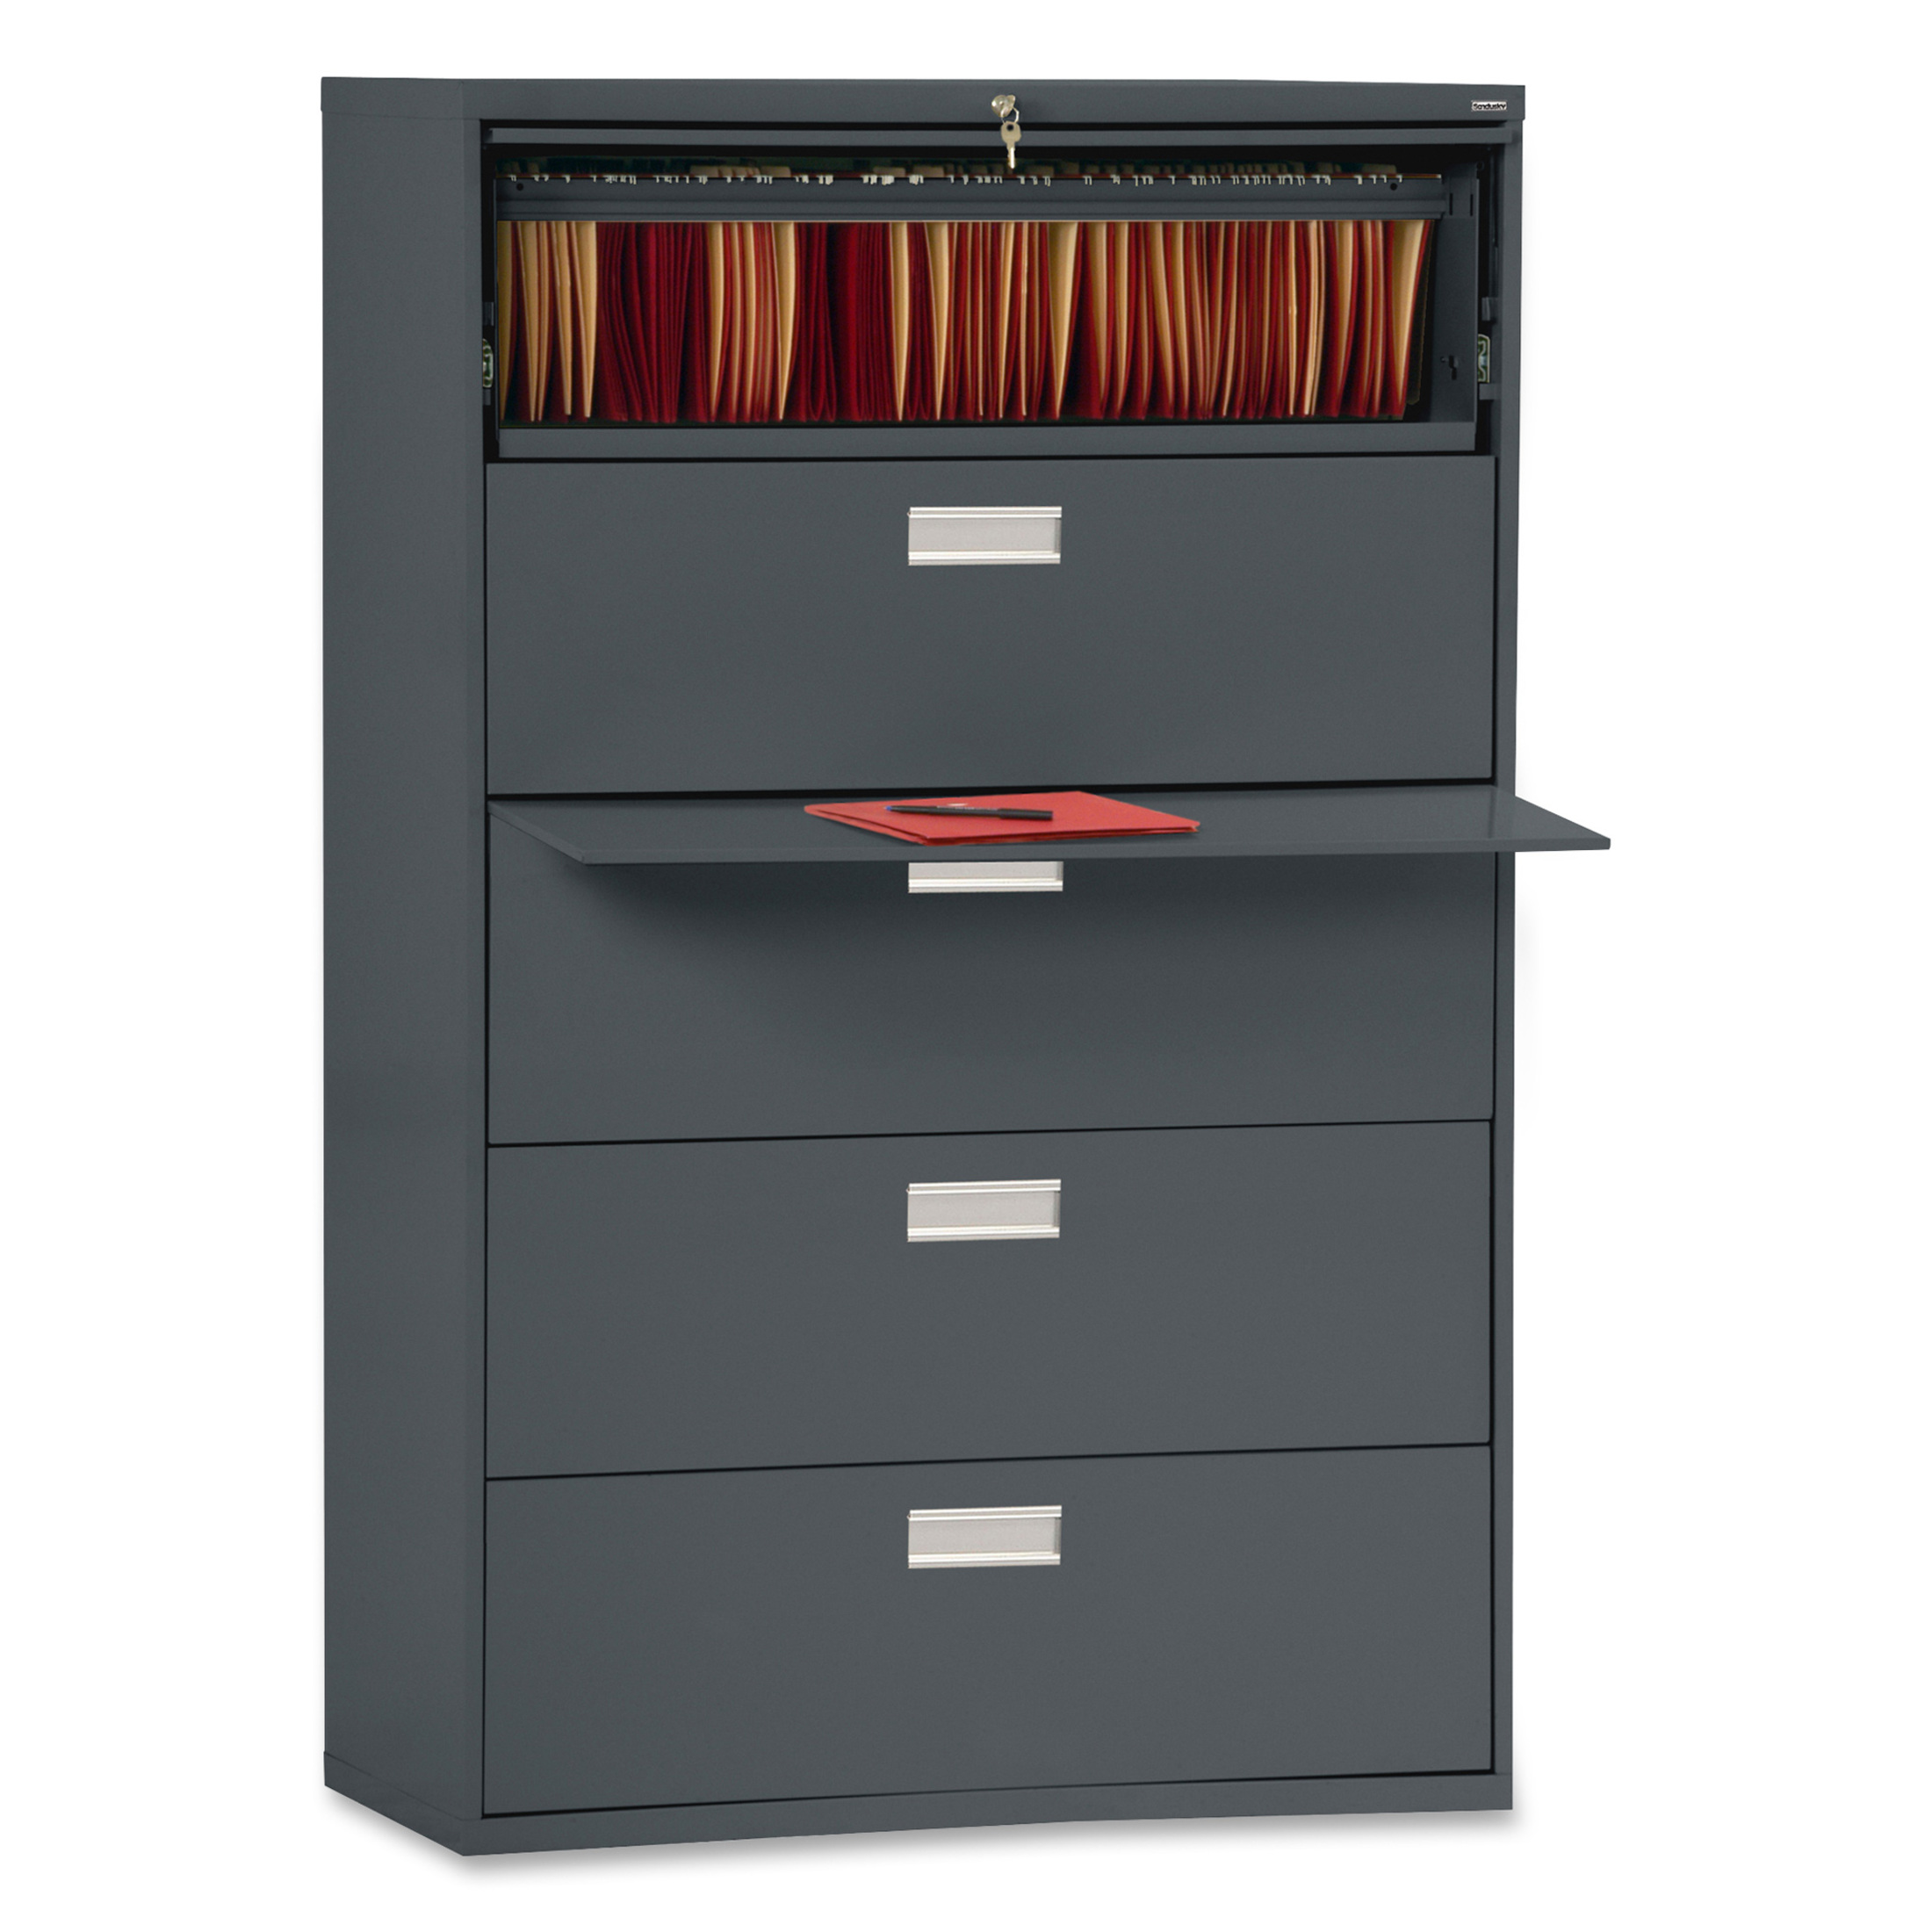 Sandusky Lee 600 Series Lateral File Cabinet, 5-Drawer - image 2 of 2